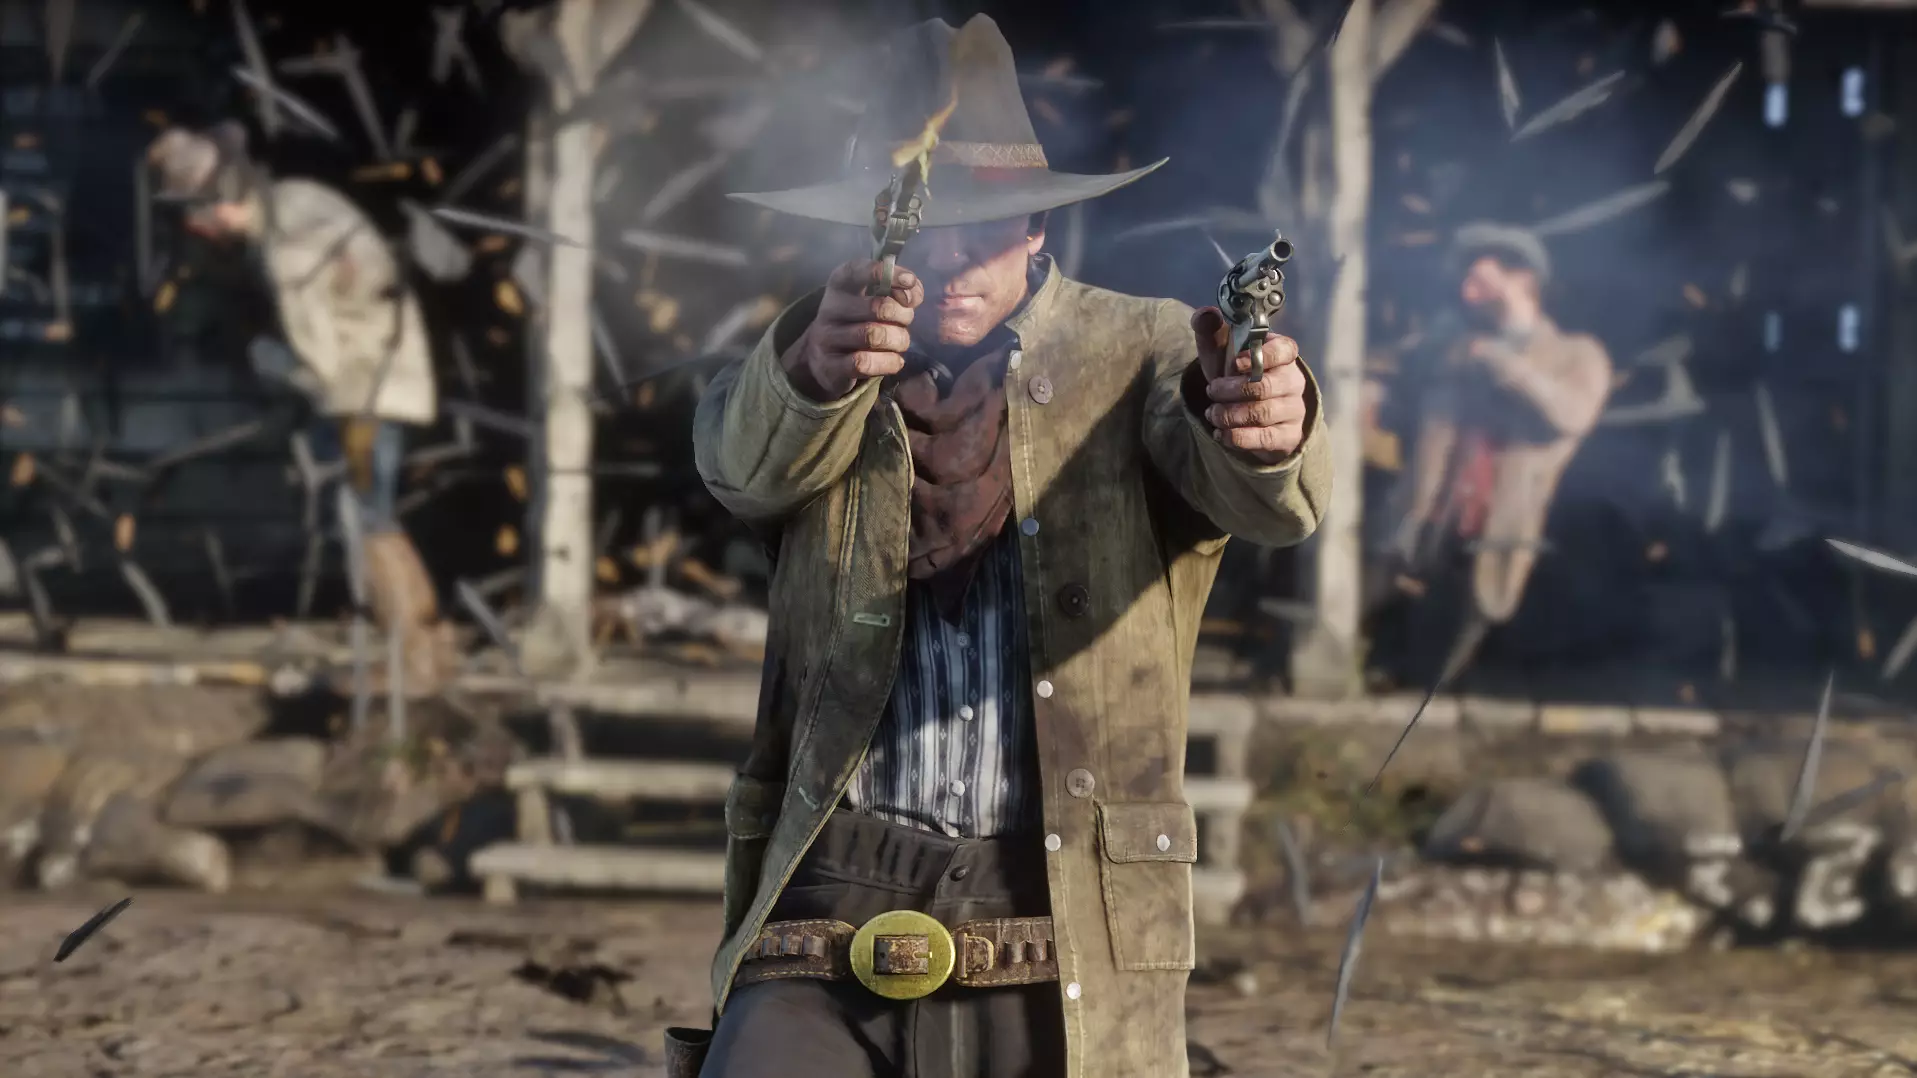 Rockstar Drops Official Trailer For 'Red Dead Redemption 2'